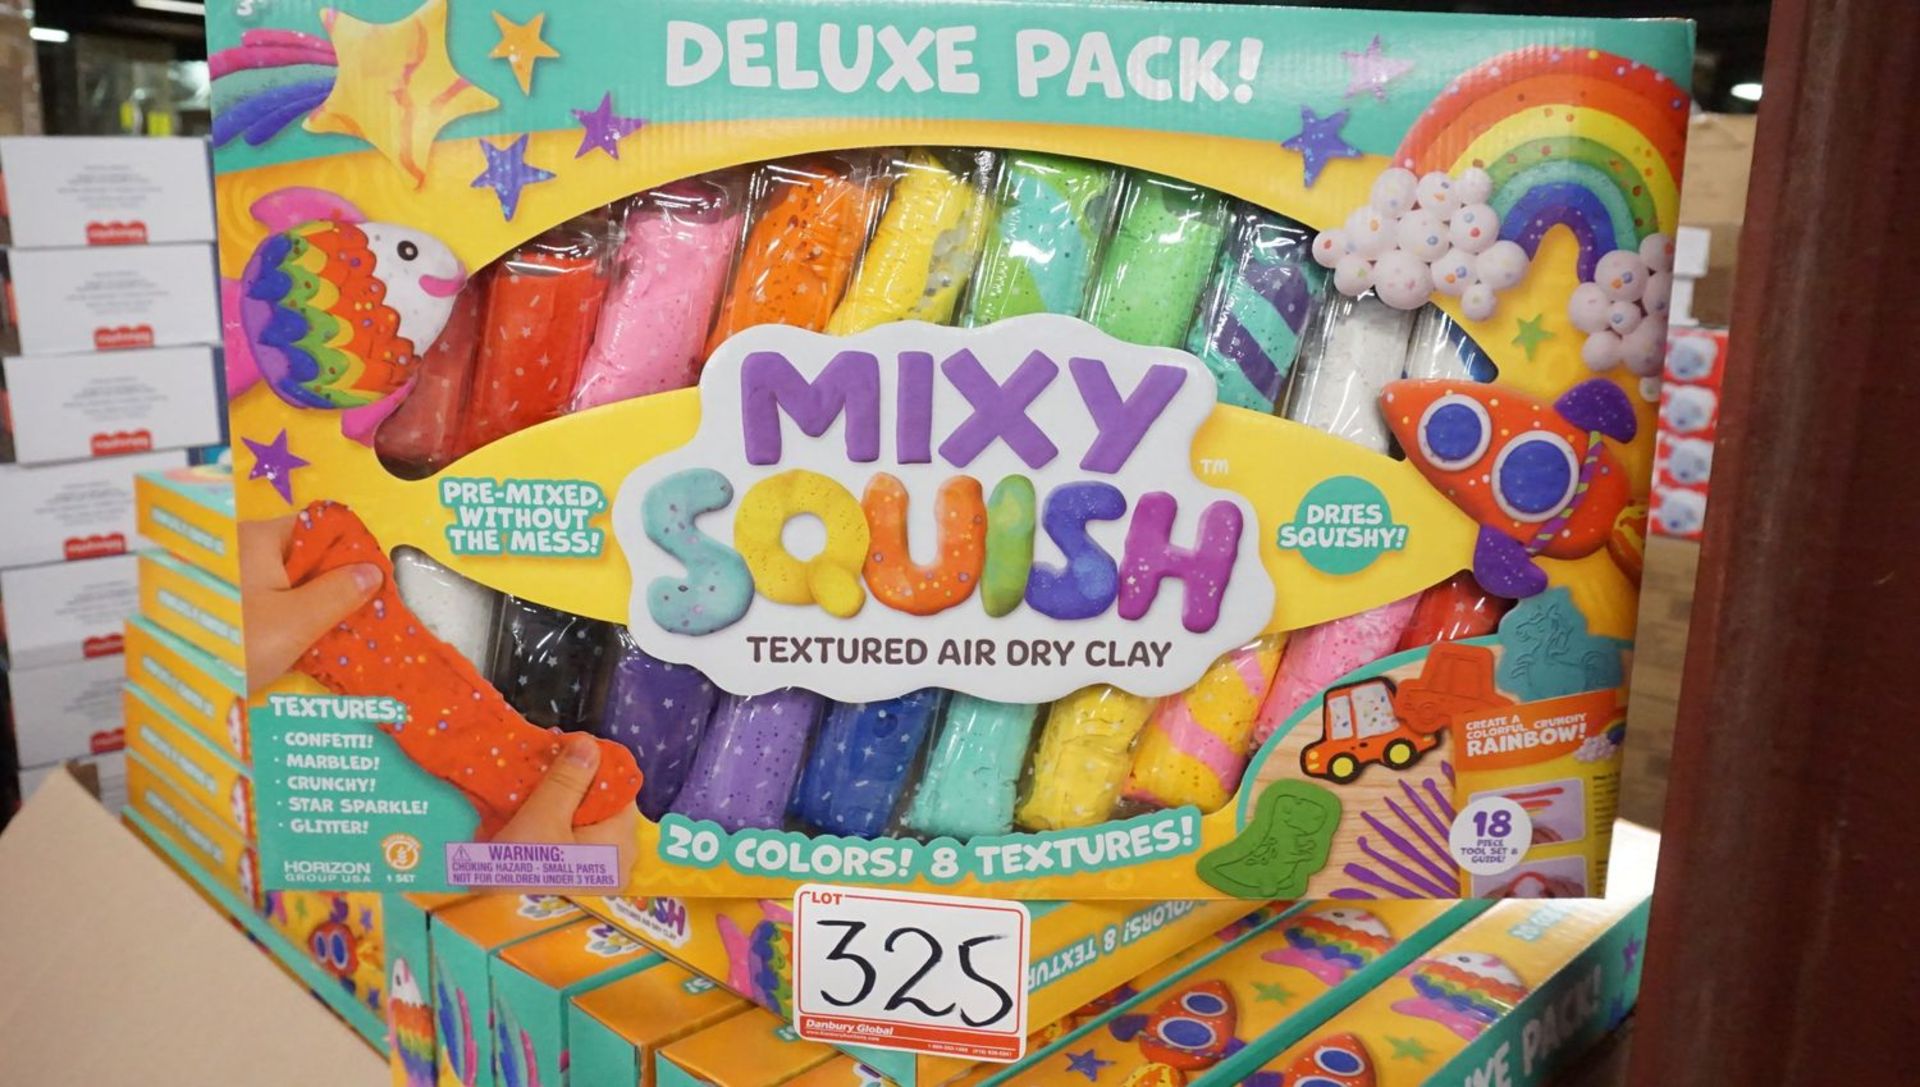 LOT - MIXY SQUISHY TEXTURED AIR DRY CLAY SETS (57 UNITS) - Image 2 of 2